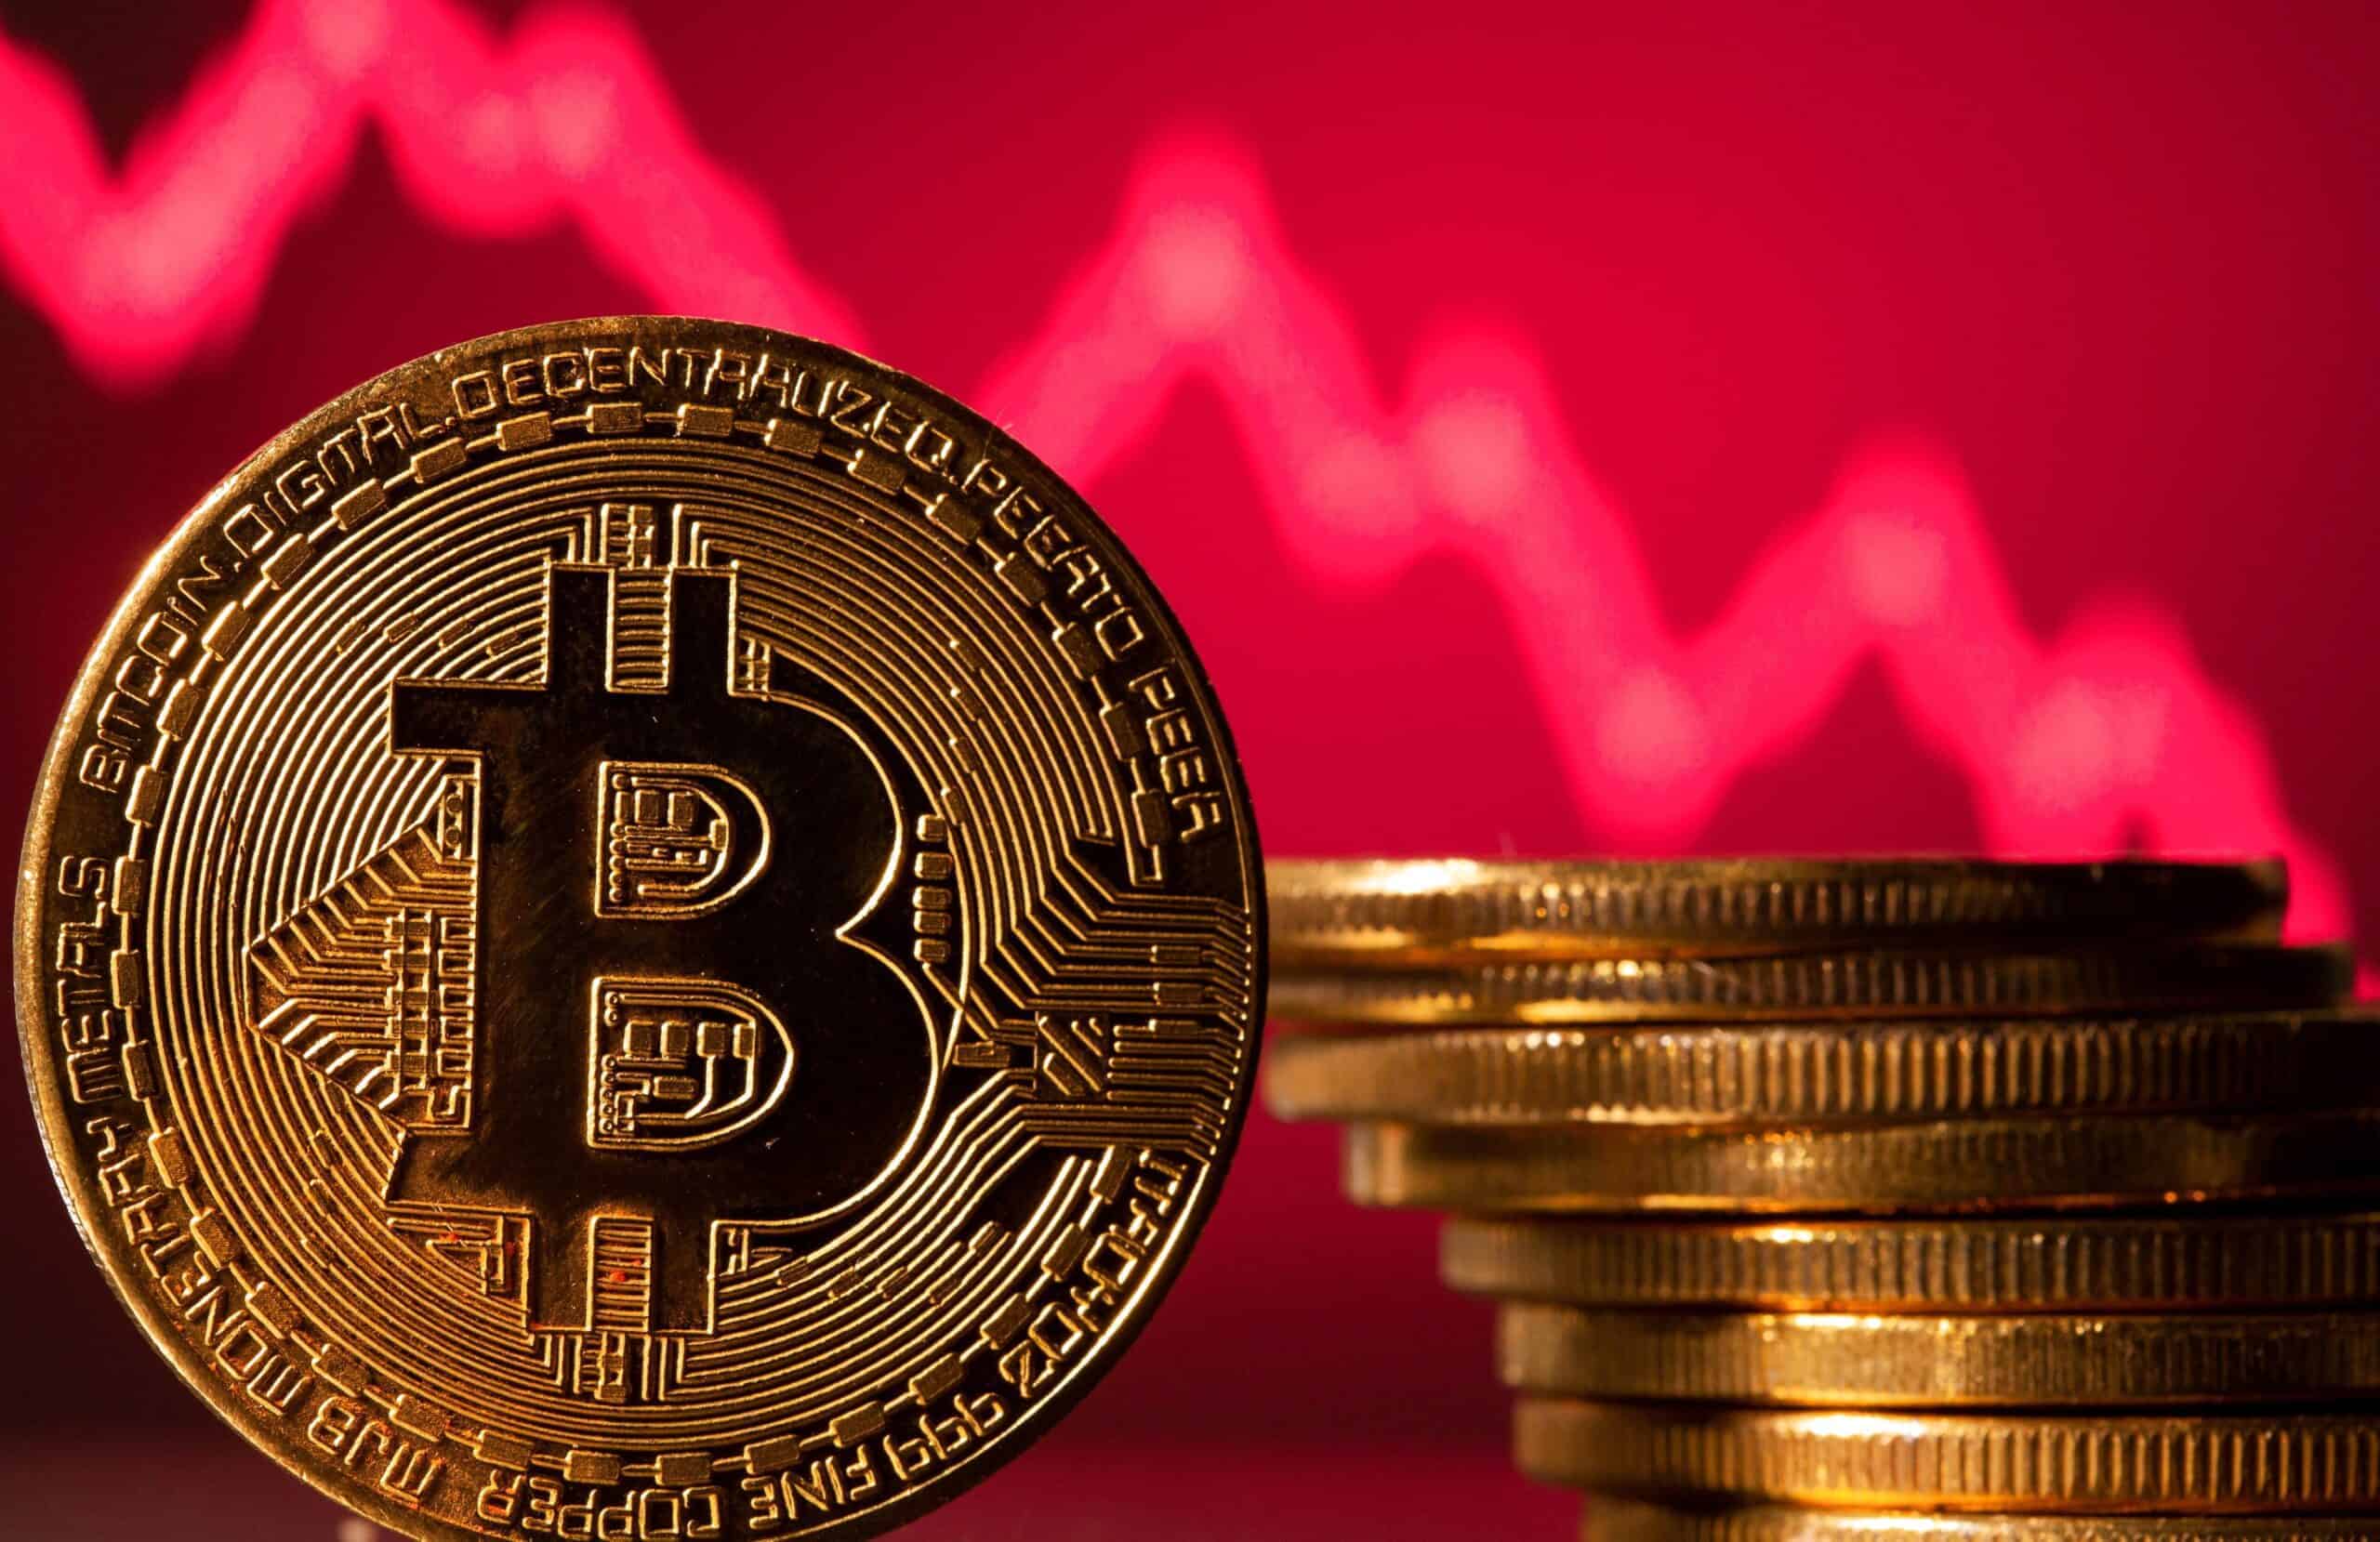 why you should invest in bitcoin